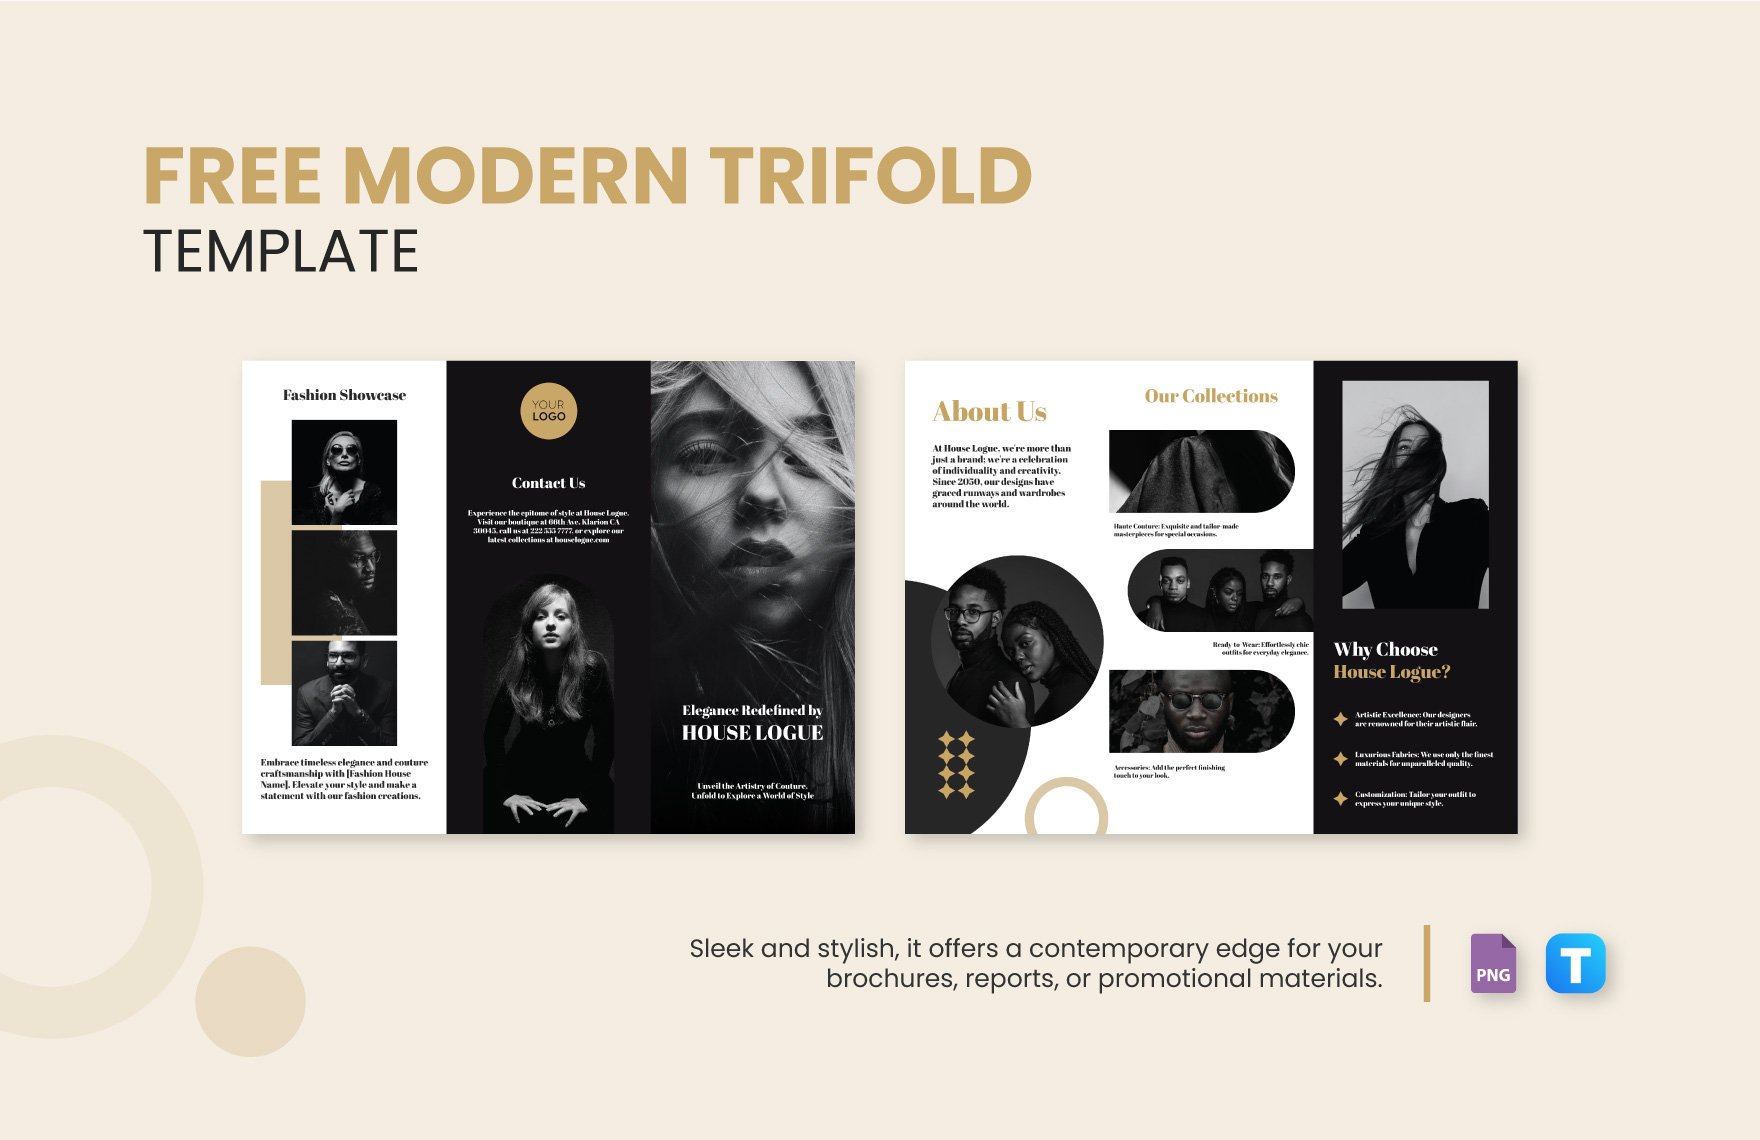 Free Modern Trifold Template